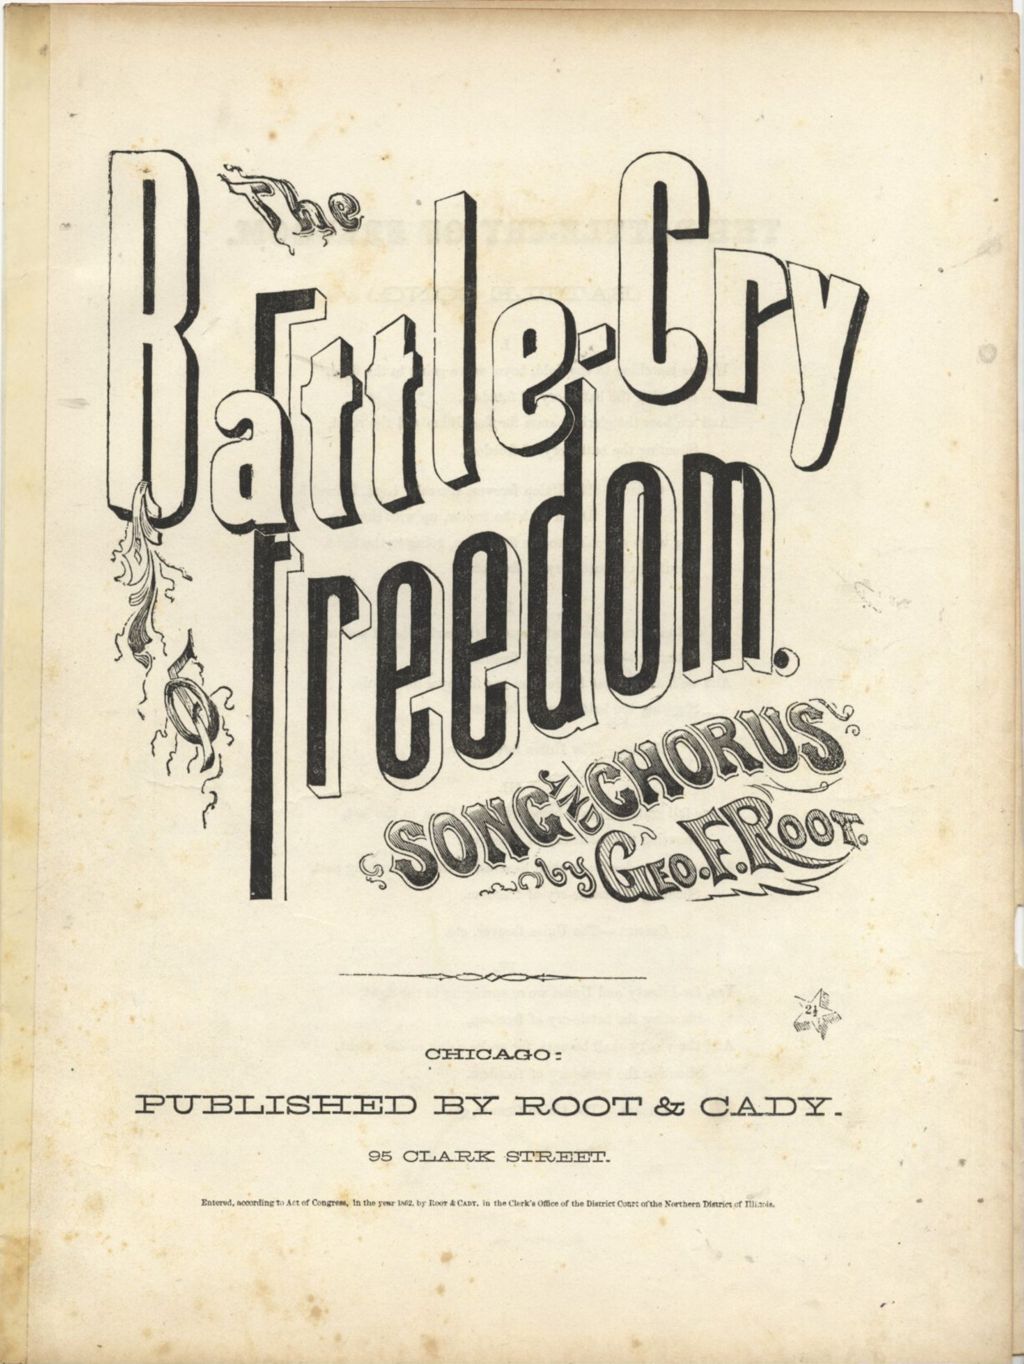 Miniature of Battle Cry of Freedom